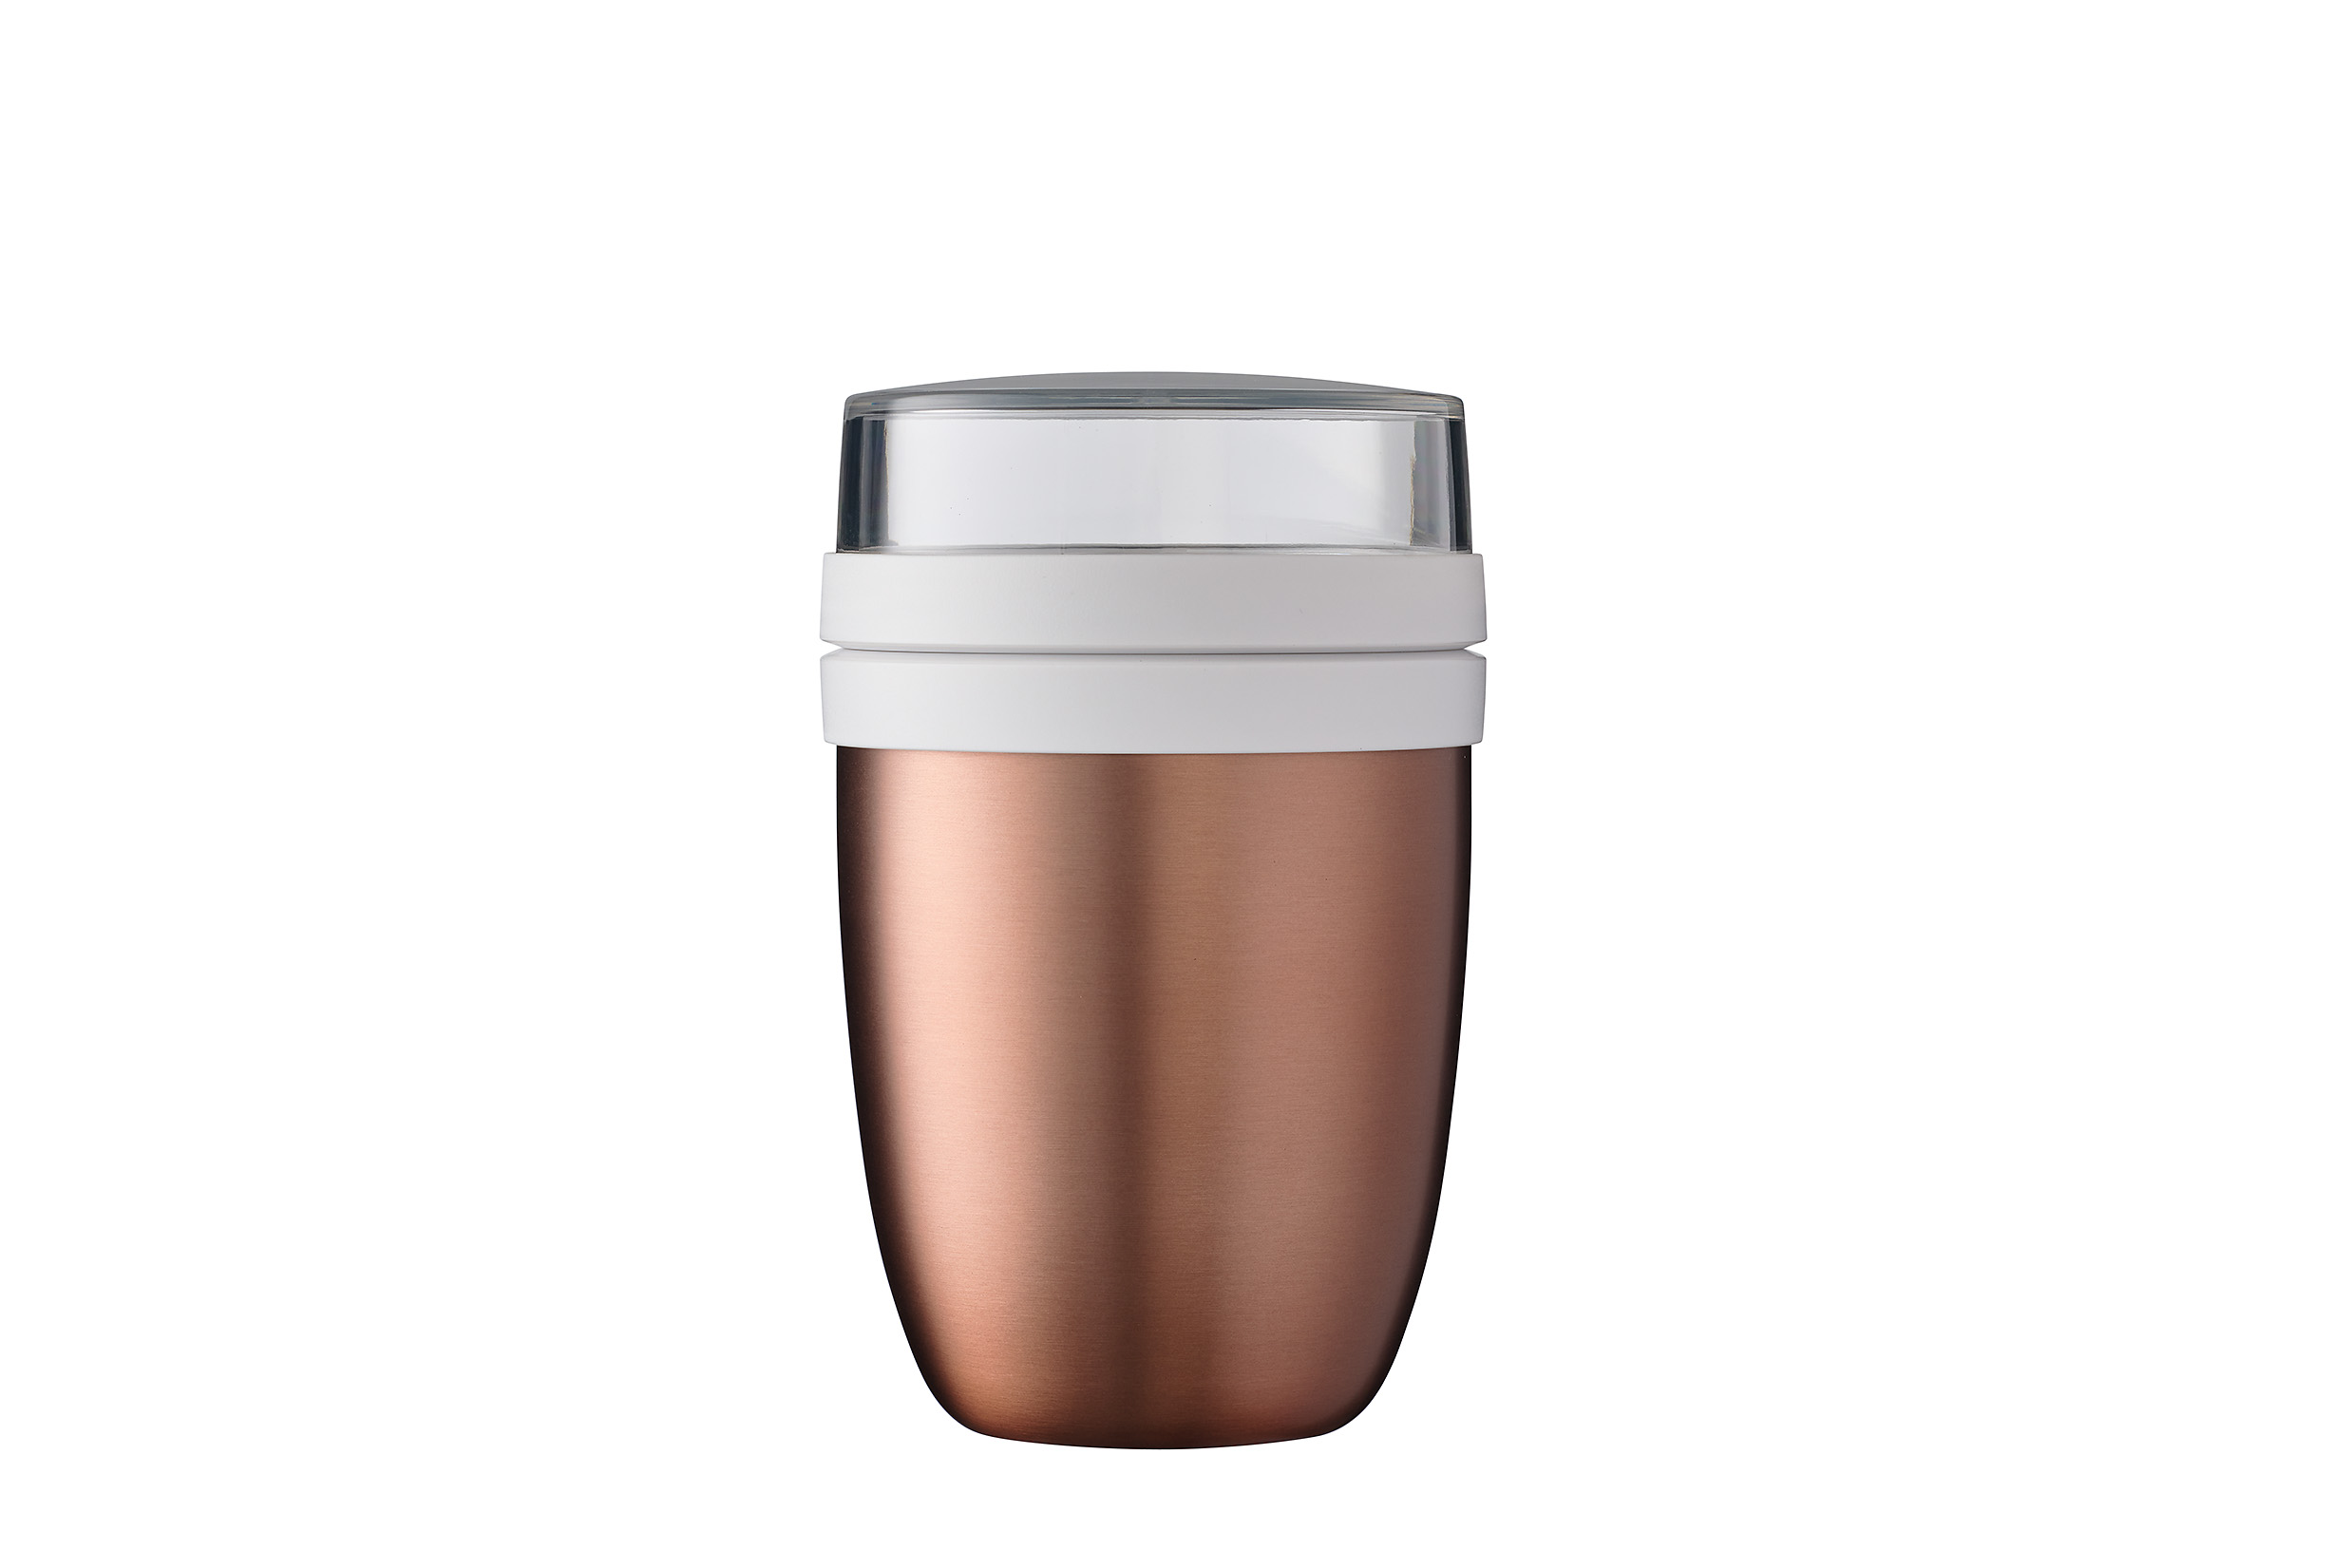 Mepal thermo lunchpot ellipse - rose gold